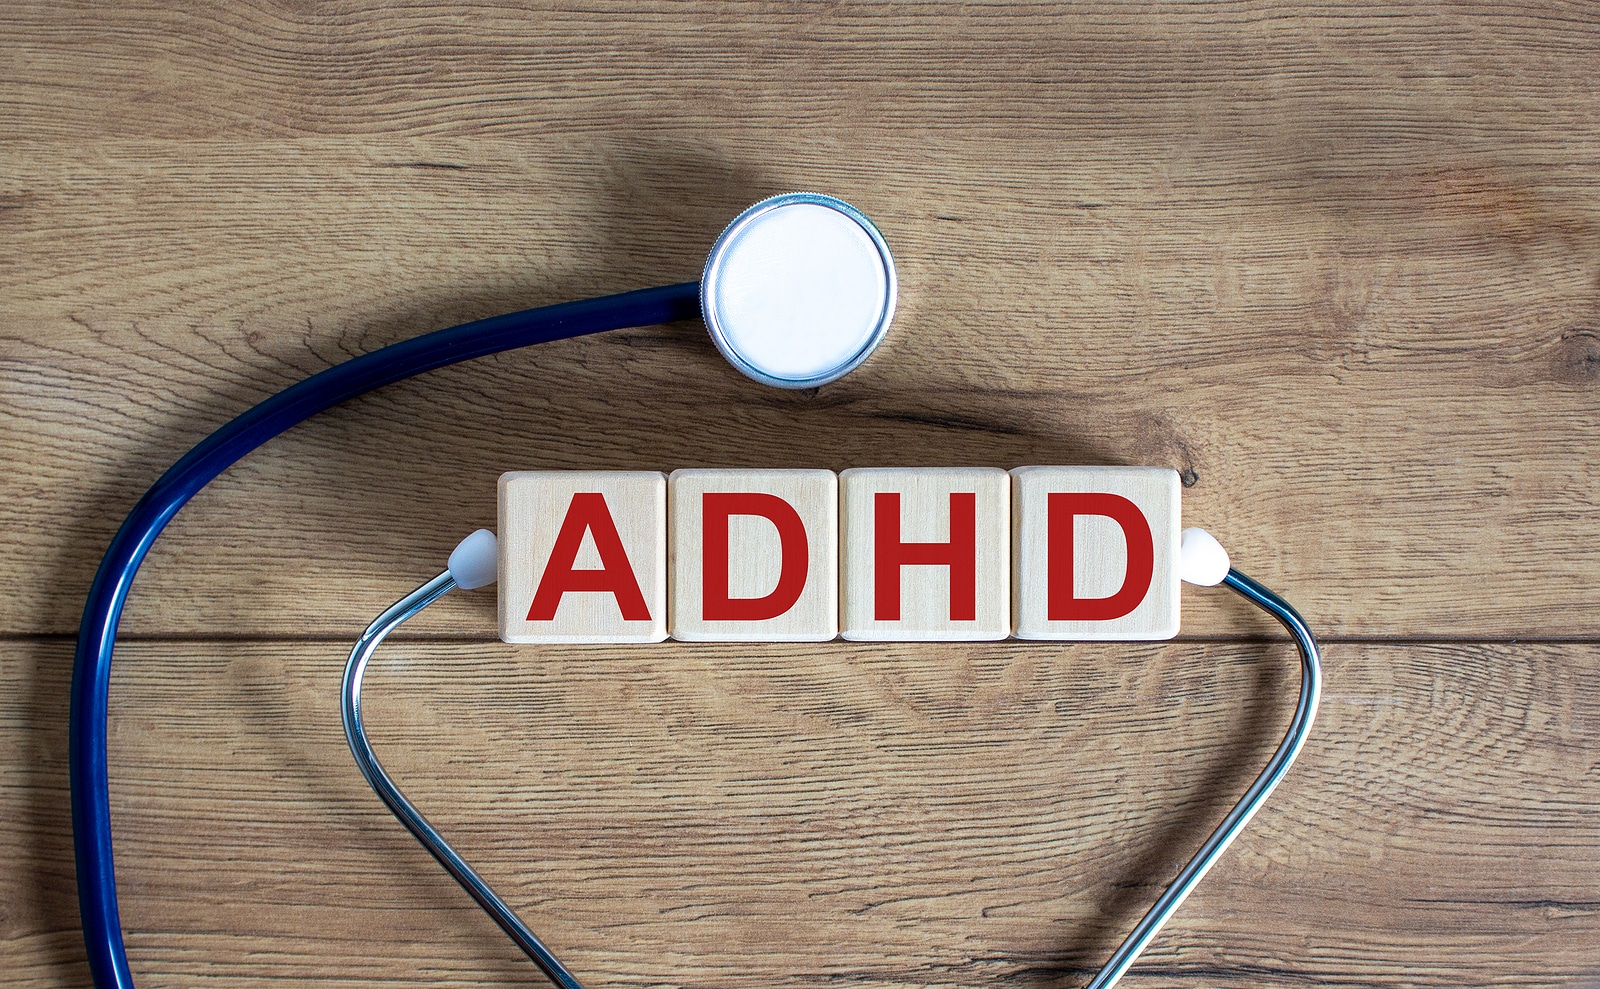 Can You Treat ADHD Without Medication?